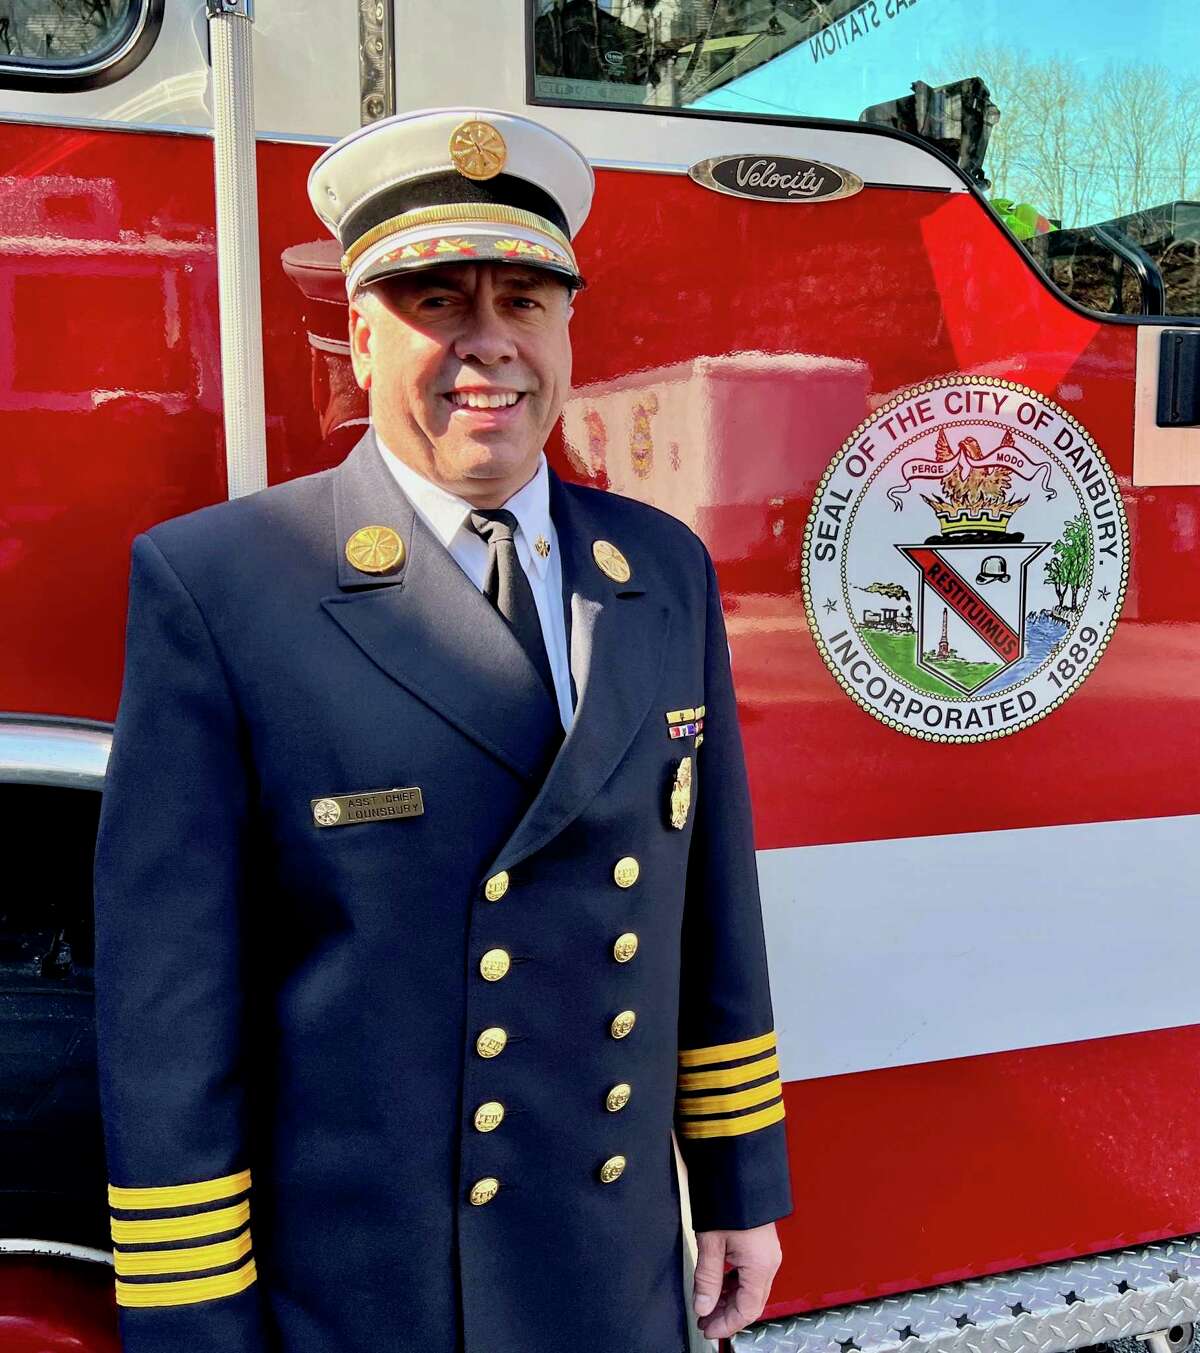 Danbury Assistant Fire Chief William Lounsbury has been accepted into a year-long leadership development program for new and aspiring fire chiefs.